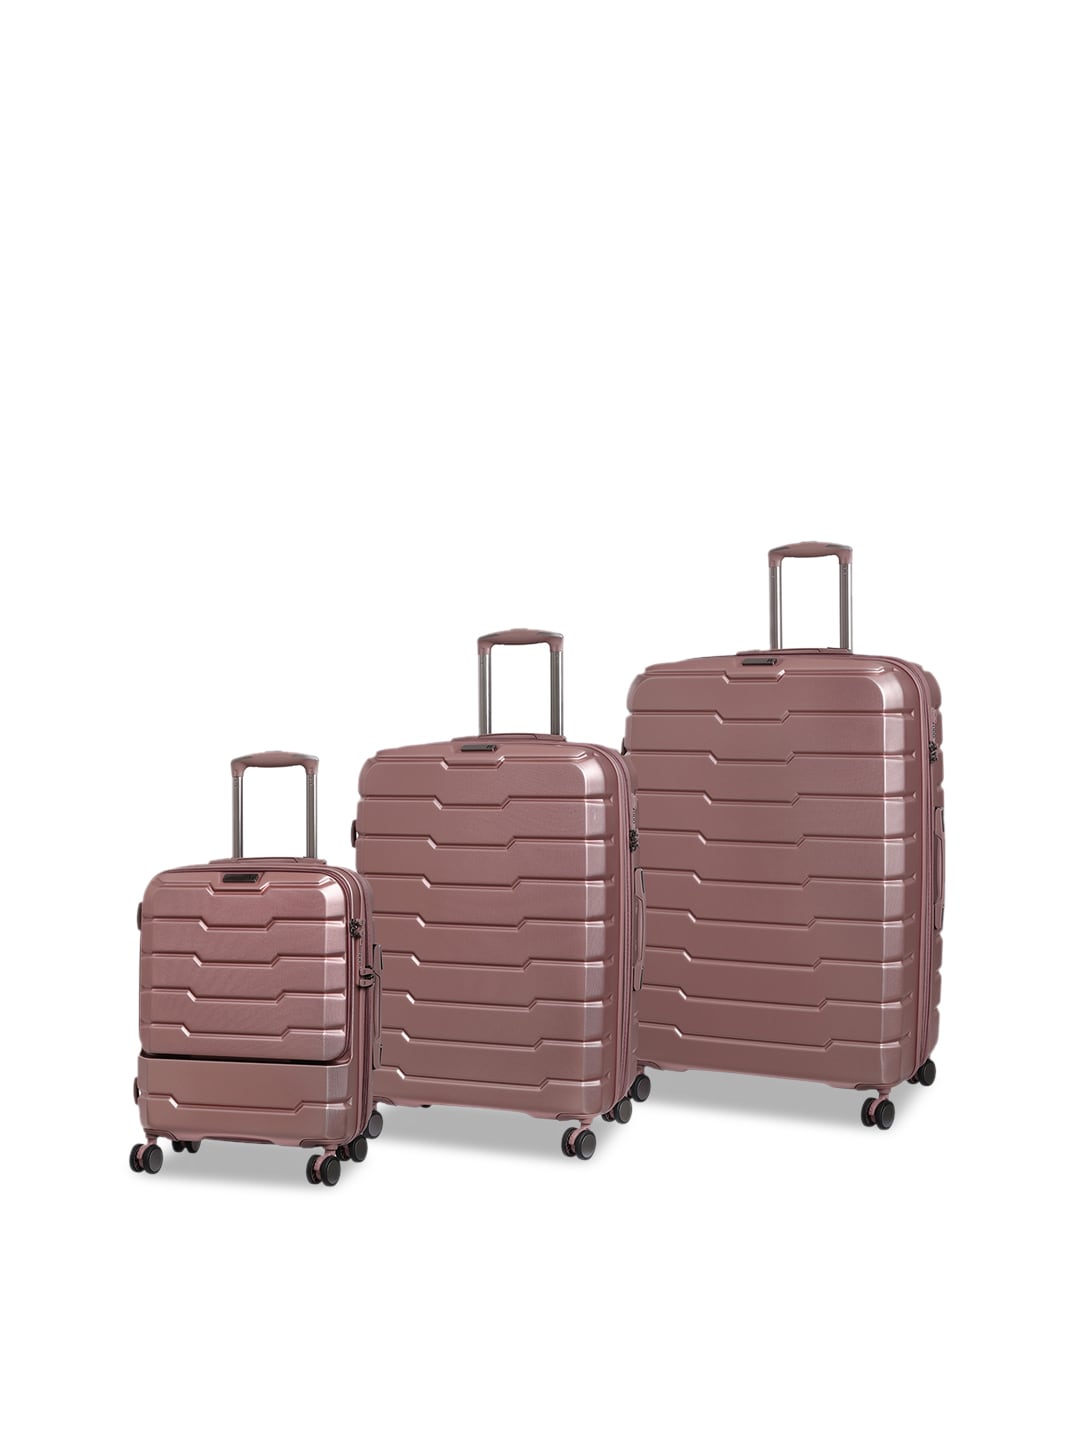 IT luggage Set Of 3 Pink Textured Hard-Sided Trolley Suitcases Price in India